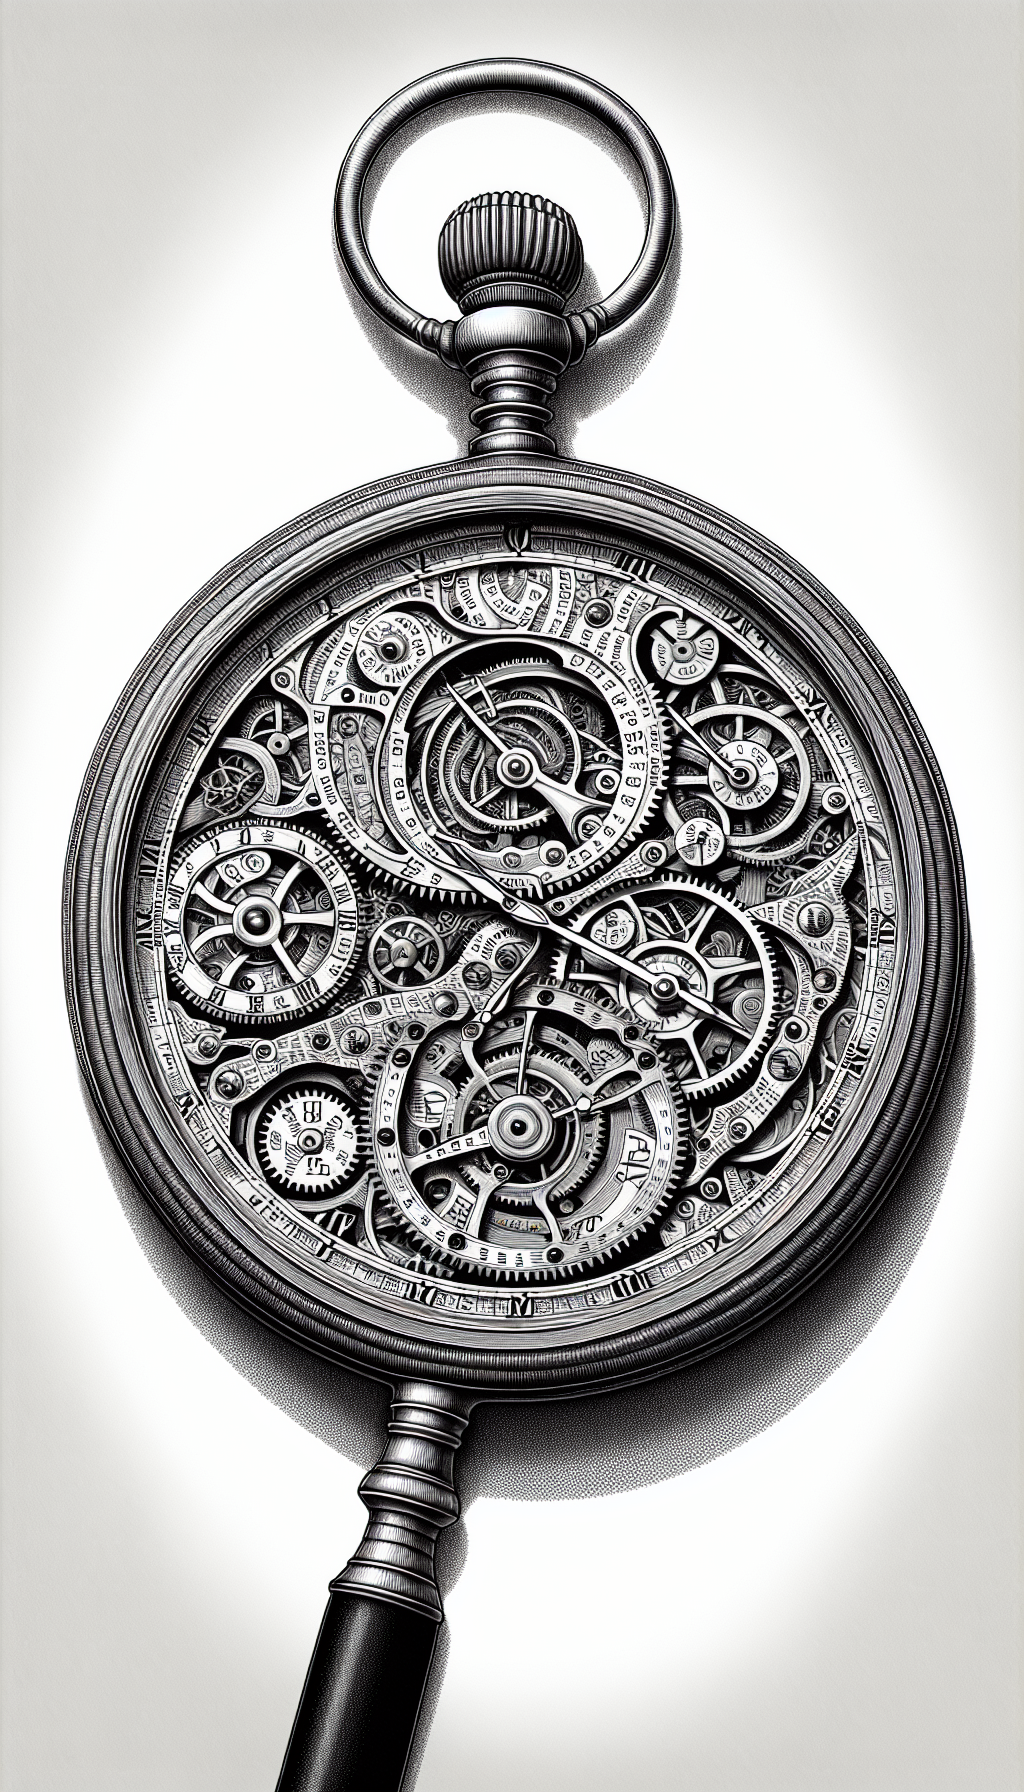 An intricate line art tableau depicts a magnifying glass revealing the gears within a classic open pocket watch, each gear inscribed with different historical dates. The watch hands point to symbols of currency, subtly shaded, indicating the watch's value. The juxtaposition of clockwork, history, and wealth weaves a captivating tapestry of the antique pocket watch's essence.